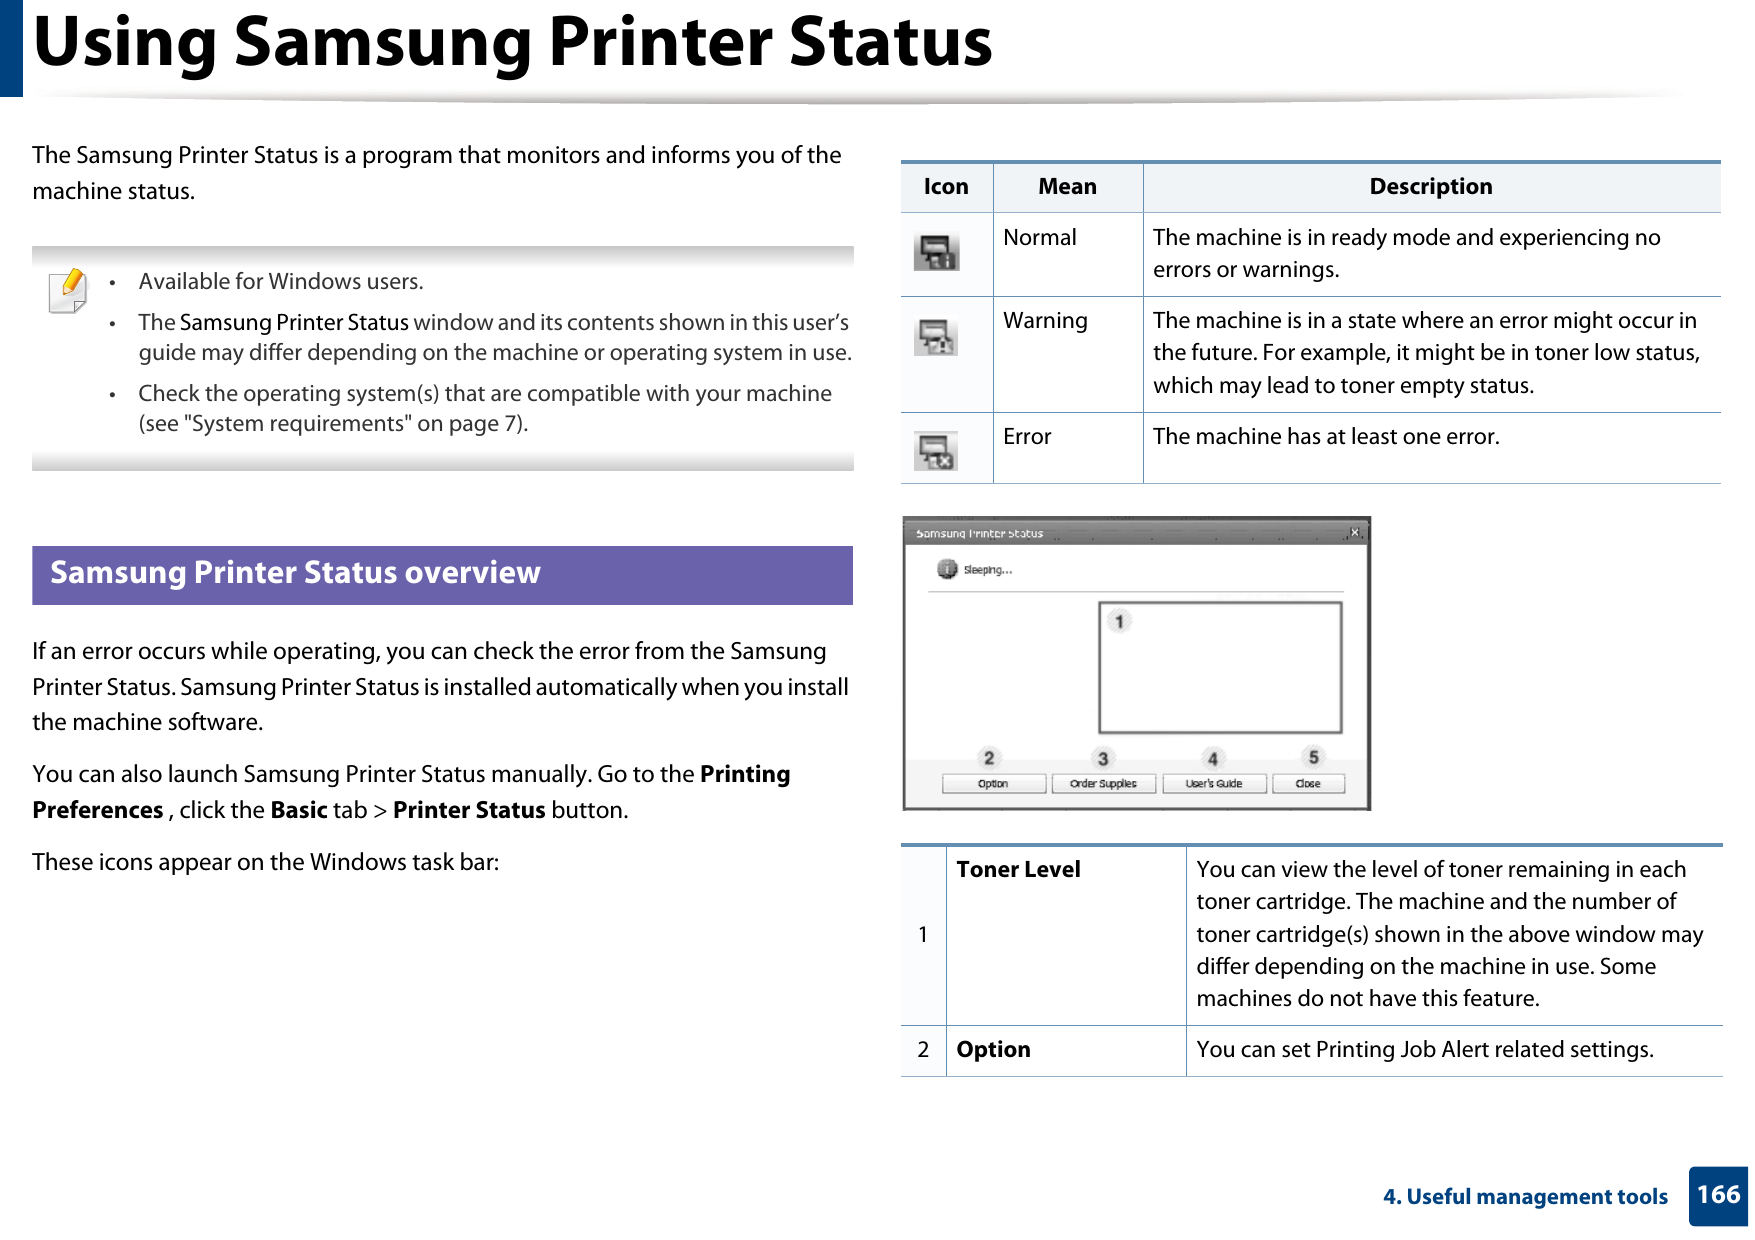 1664. Useful management toolsUsing Samsung Printer StatusThe Samsung Printer Status is a program that monitors and informs you of the machine status.  • Available for Windows users.• The Samsung Printer Status window and its contents shown in this user’s guide may differ depending on the machine or operating system in use.• Check the operating system(s) that are compatible with your machine (see &quot;System requirements&quot; on page 7). 7 Samsung Printer Status overviewIf an error occurs while operating, you can check the error from the Samsung Printer Status. Samsung Printer Status is installed automatically when you install the machine software. You can also launch Samsung Printer Status manually. Go to the Printing Preferences , click the Basic tab &gt; Printer Status button.These icons appear on the Windows task bar:Icon Mean DescriptionNormal The machine is in ready mode and experiencing no errors or warnings.Warning The machine is in a state where an error might occur in the future. For example, it might be in toner low status, which may lead to toner empty status. Error The machine has at least one error.1Toner Level You can view the level of toner remaining in each toner cartridge. The machine and the number of toner cartridge(s) shown in the above window may differ depending on the machine in use. Some machines do not have this feature.2Option You can set Printing Job Alert related settings.